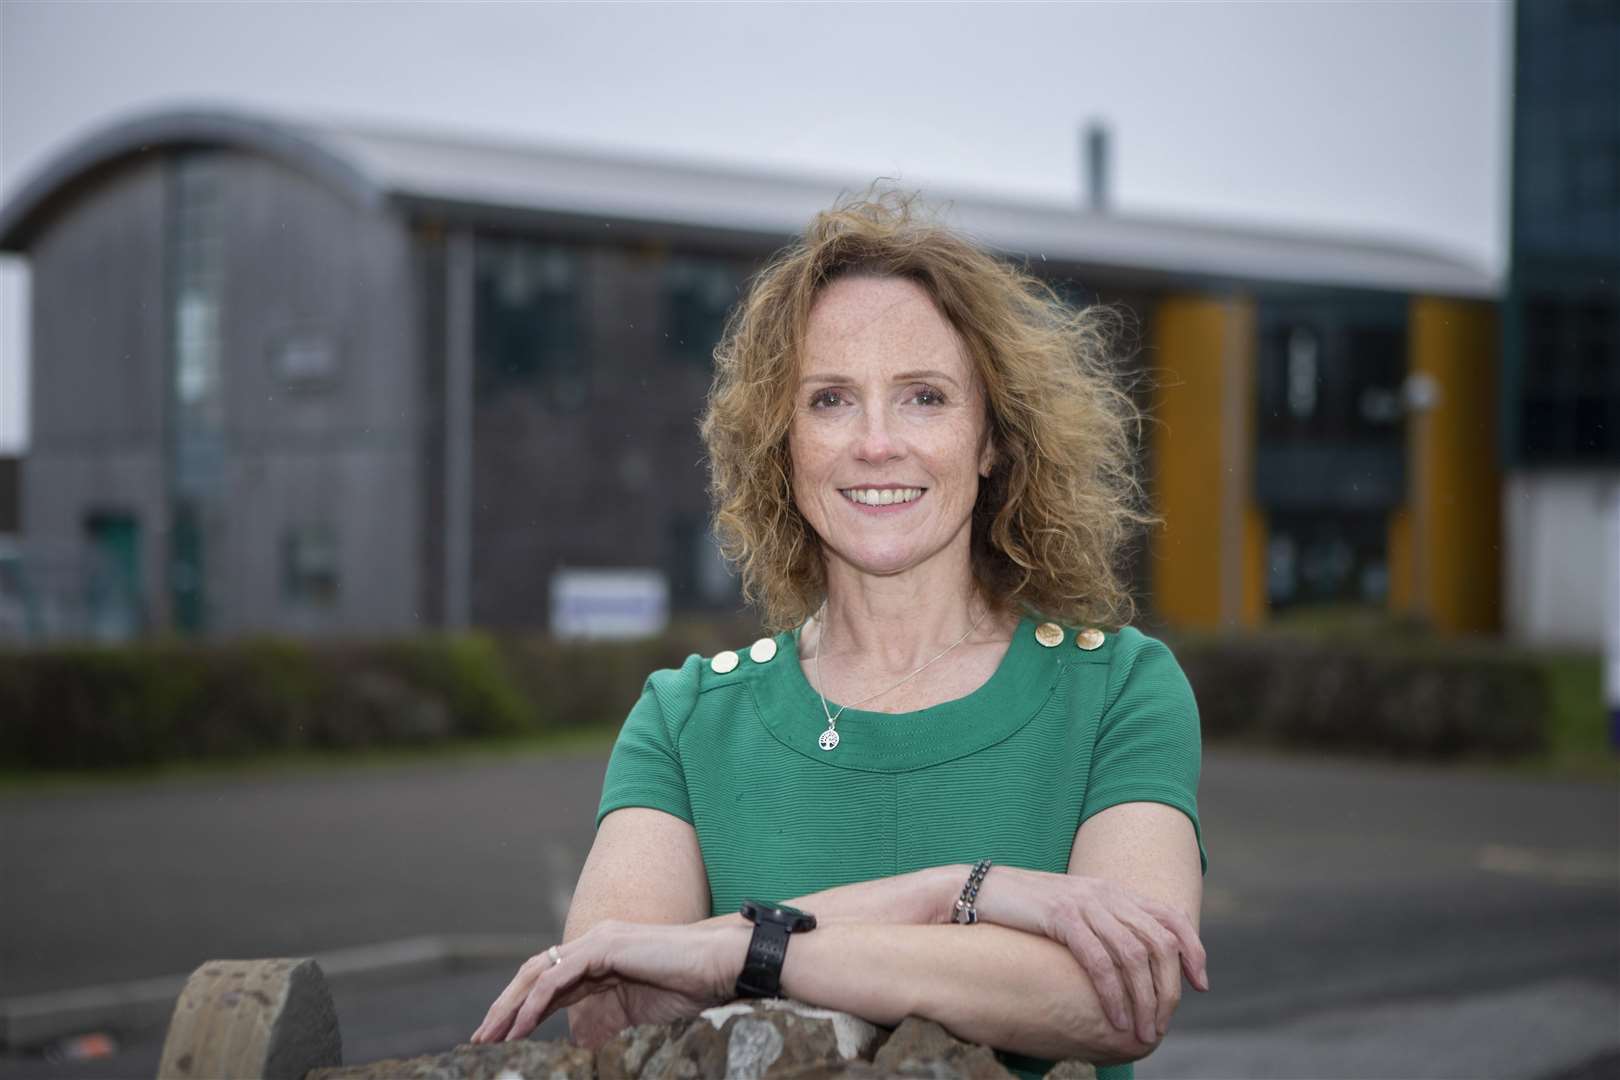 Debbie Murray is the new principal of North Highland College UHI, having served as interim principal since last October.